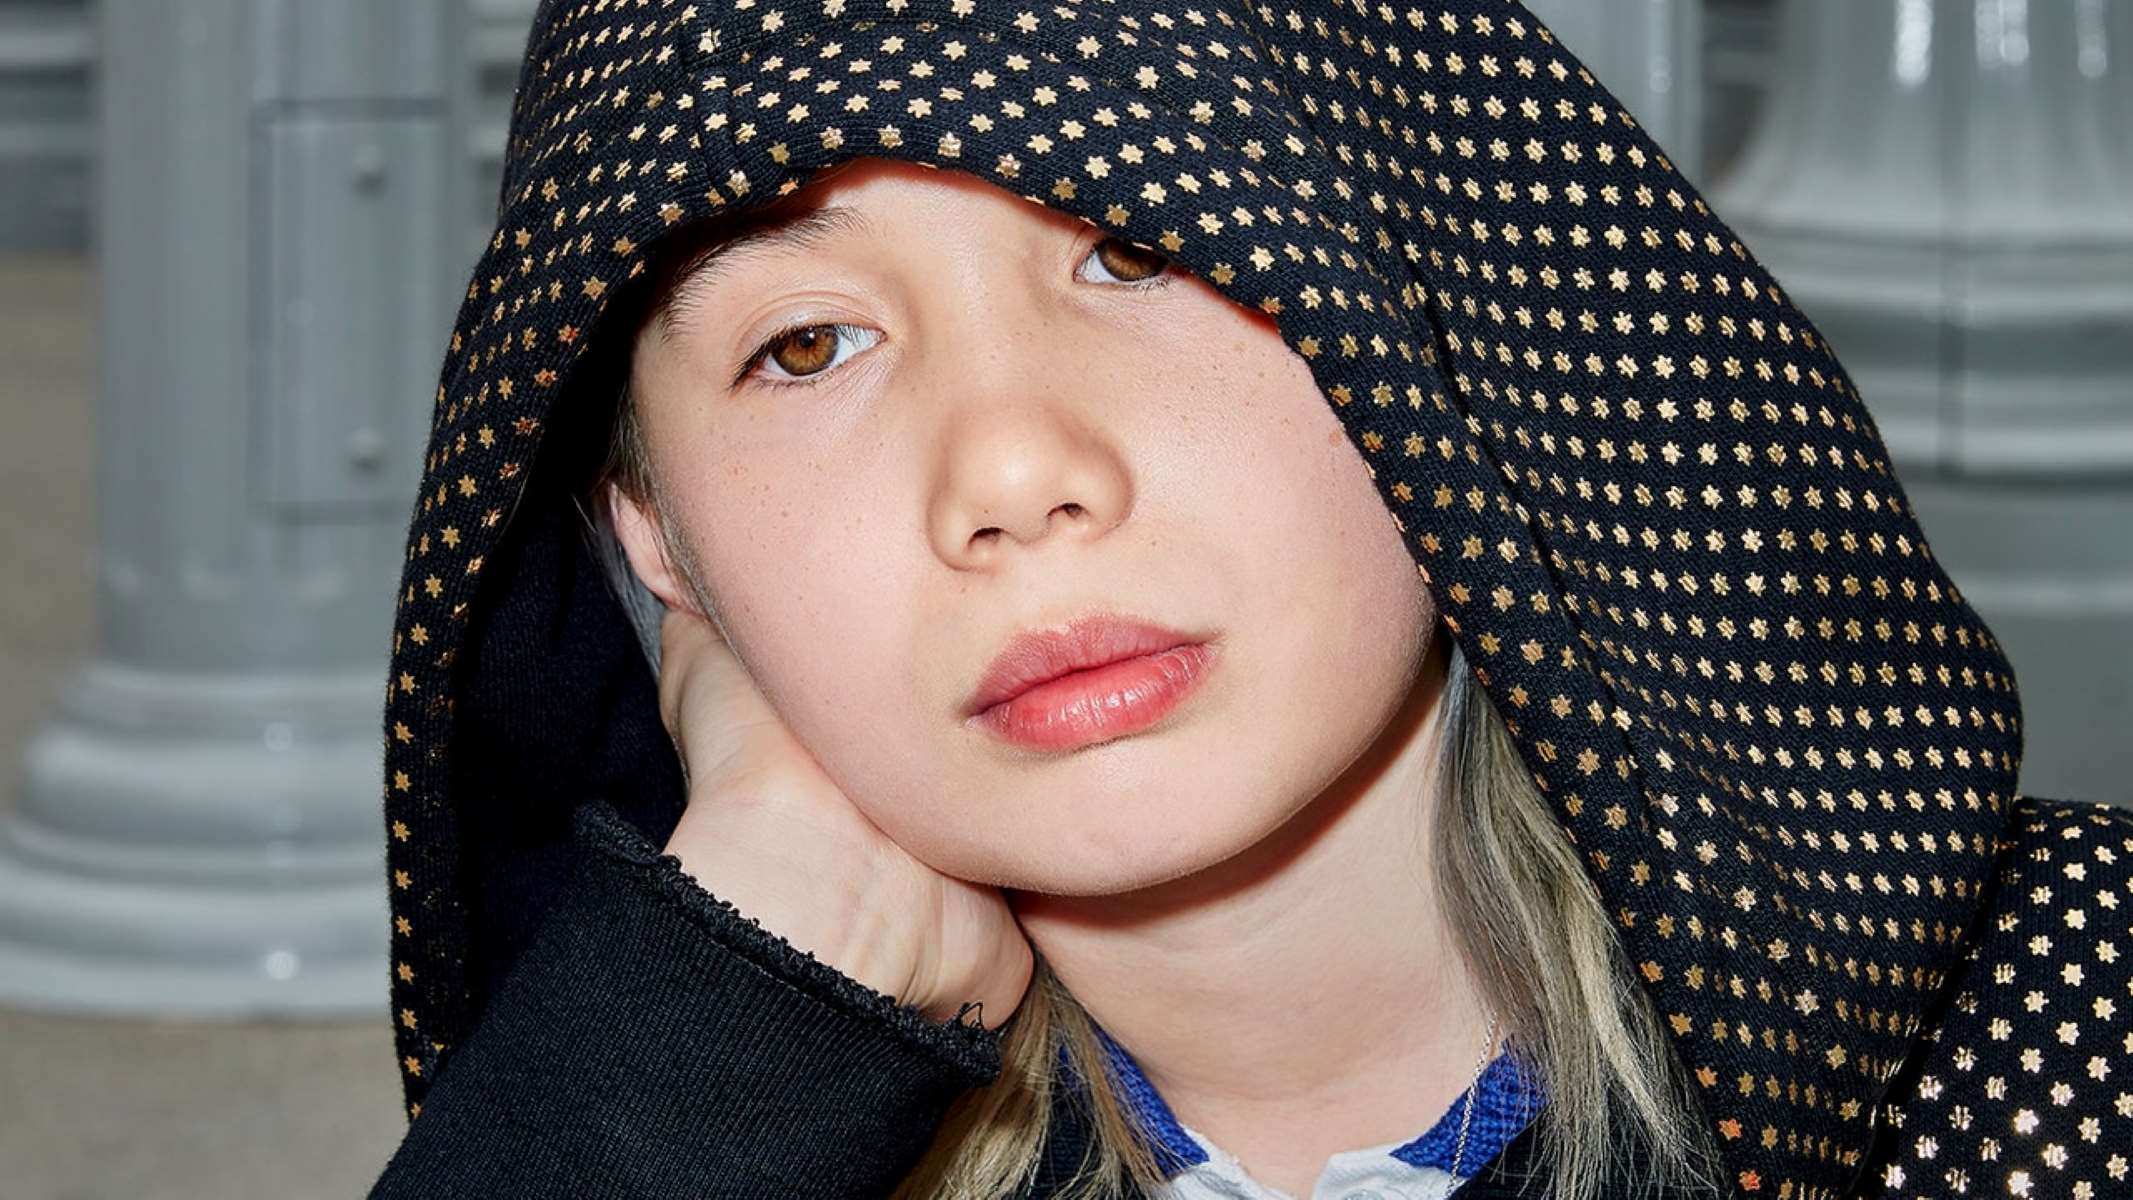 New Allegations: Lil Tay’s Account Accuses Her Father Of Faking Her Death